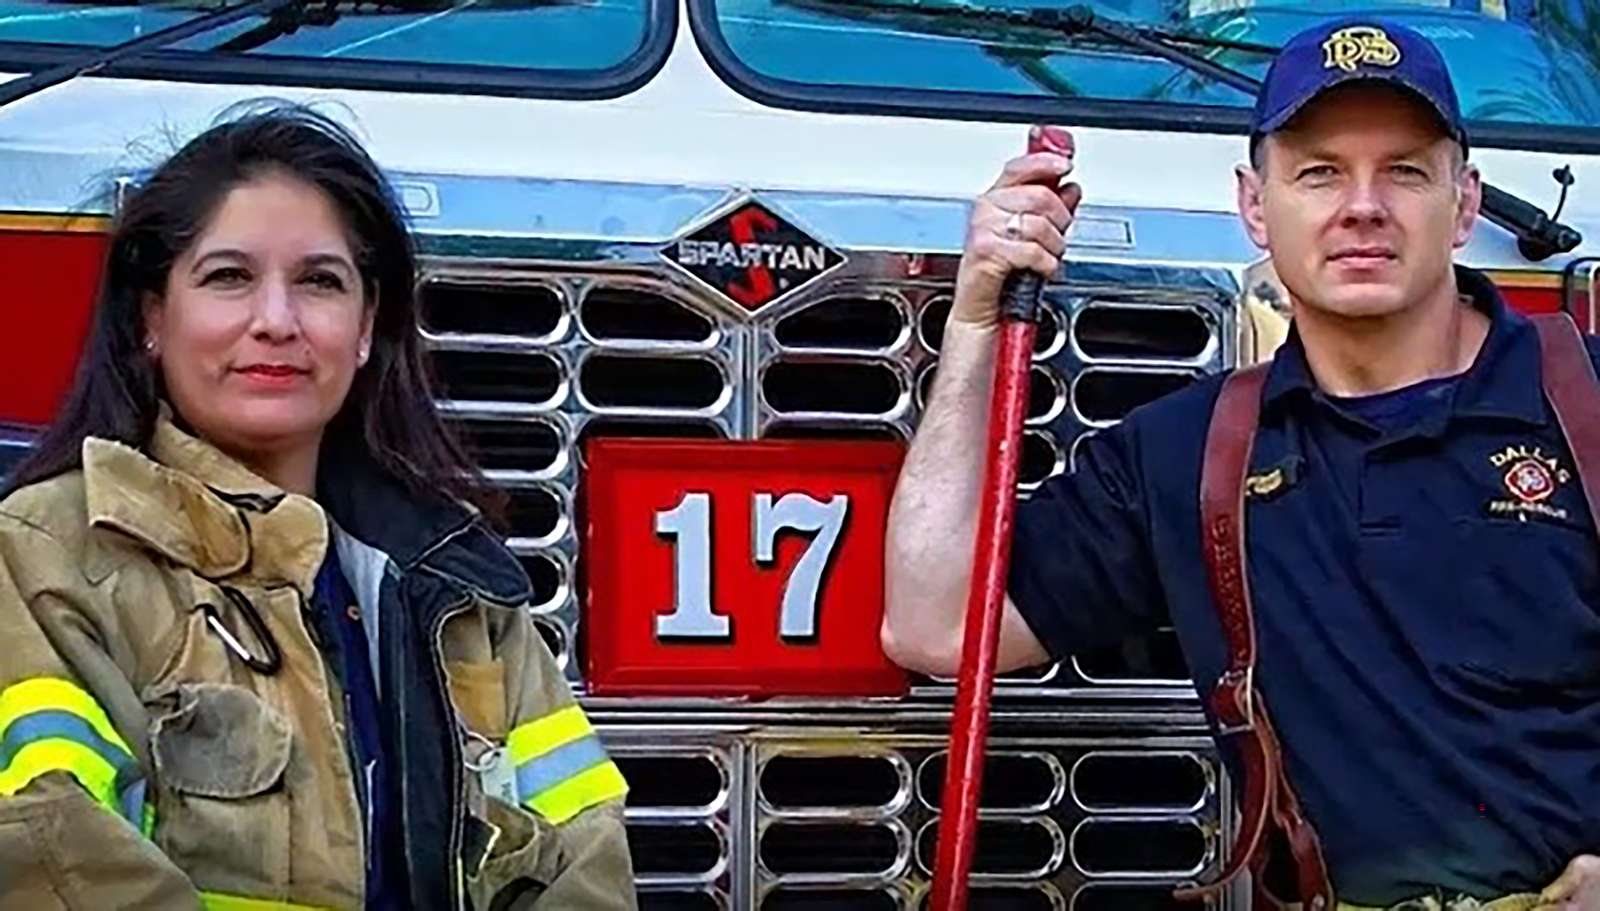 Liz the firefighter puzzle online from photo